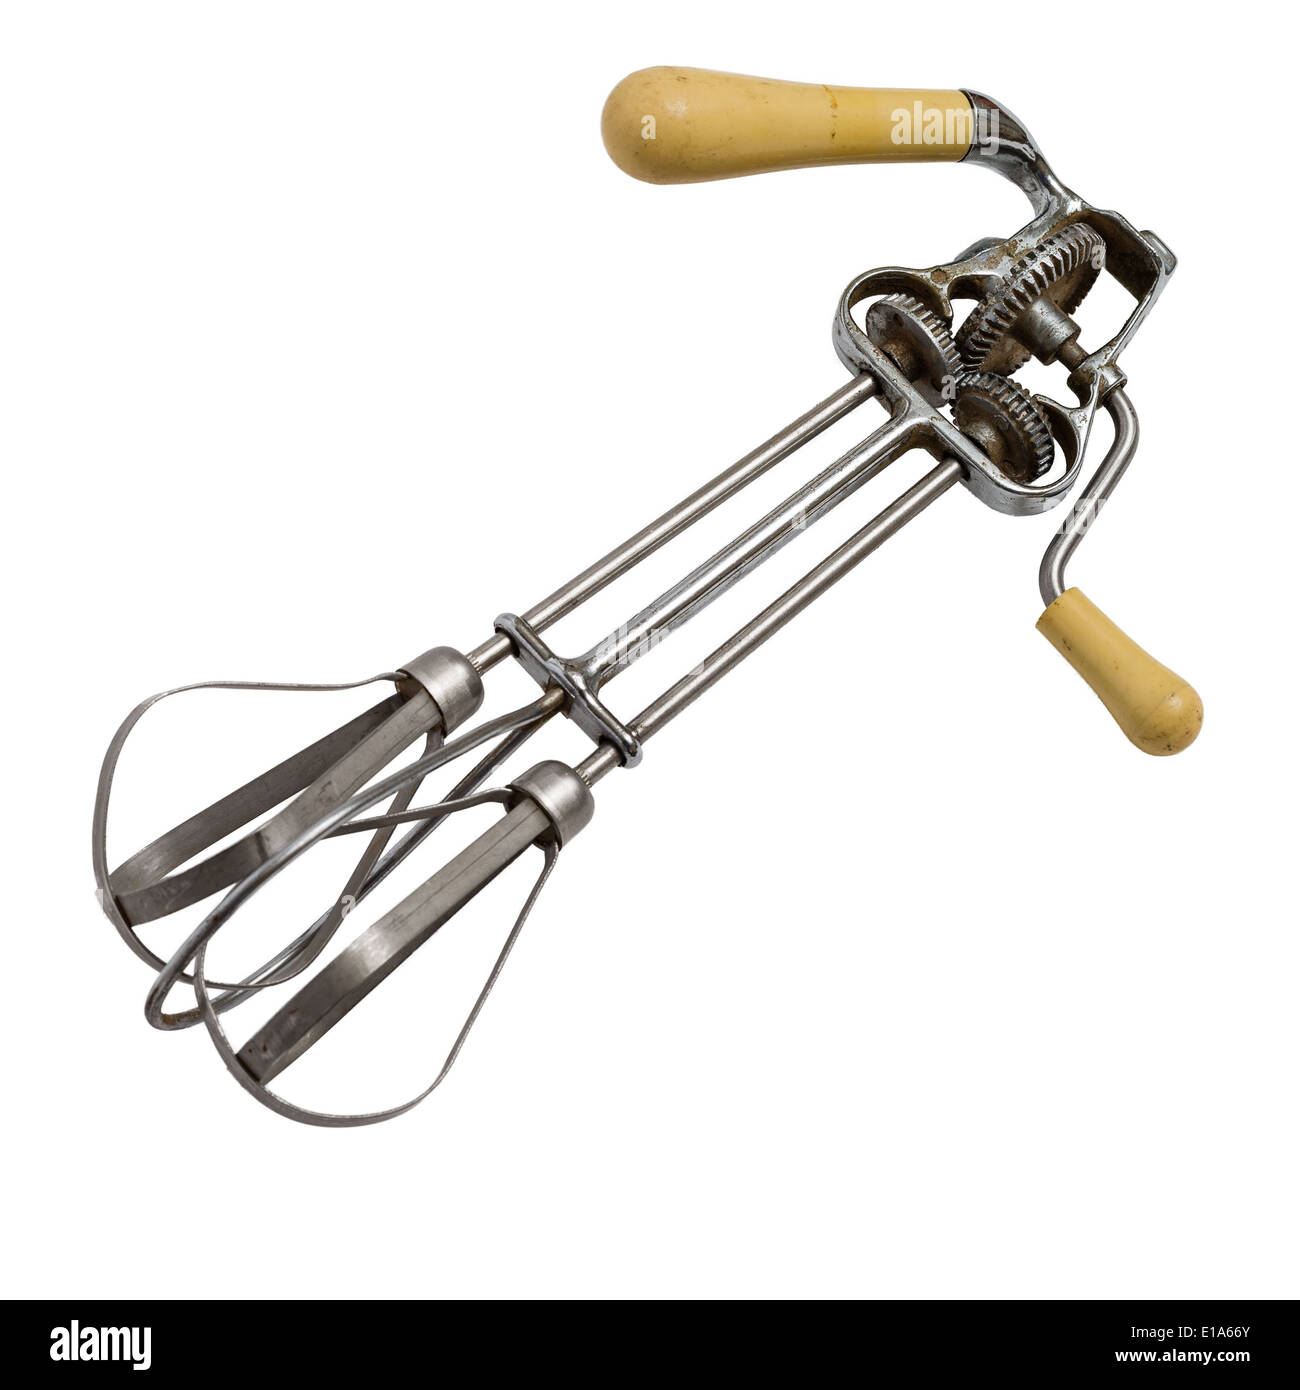 https://c8.alamy.com/comp/E1A66Y/antique-egg-beater-with-natural-wooden-handles-on-a-solid-white-background-E1A66Y.jpg